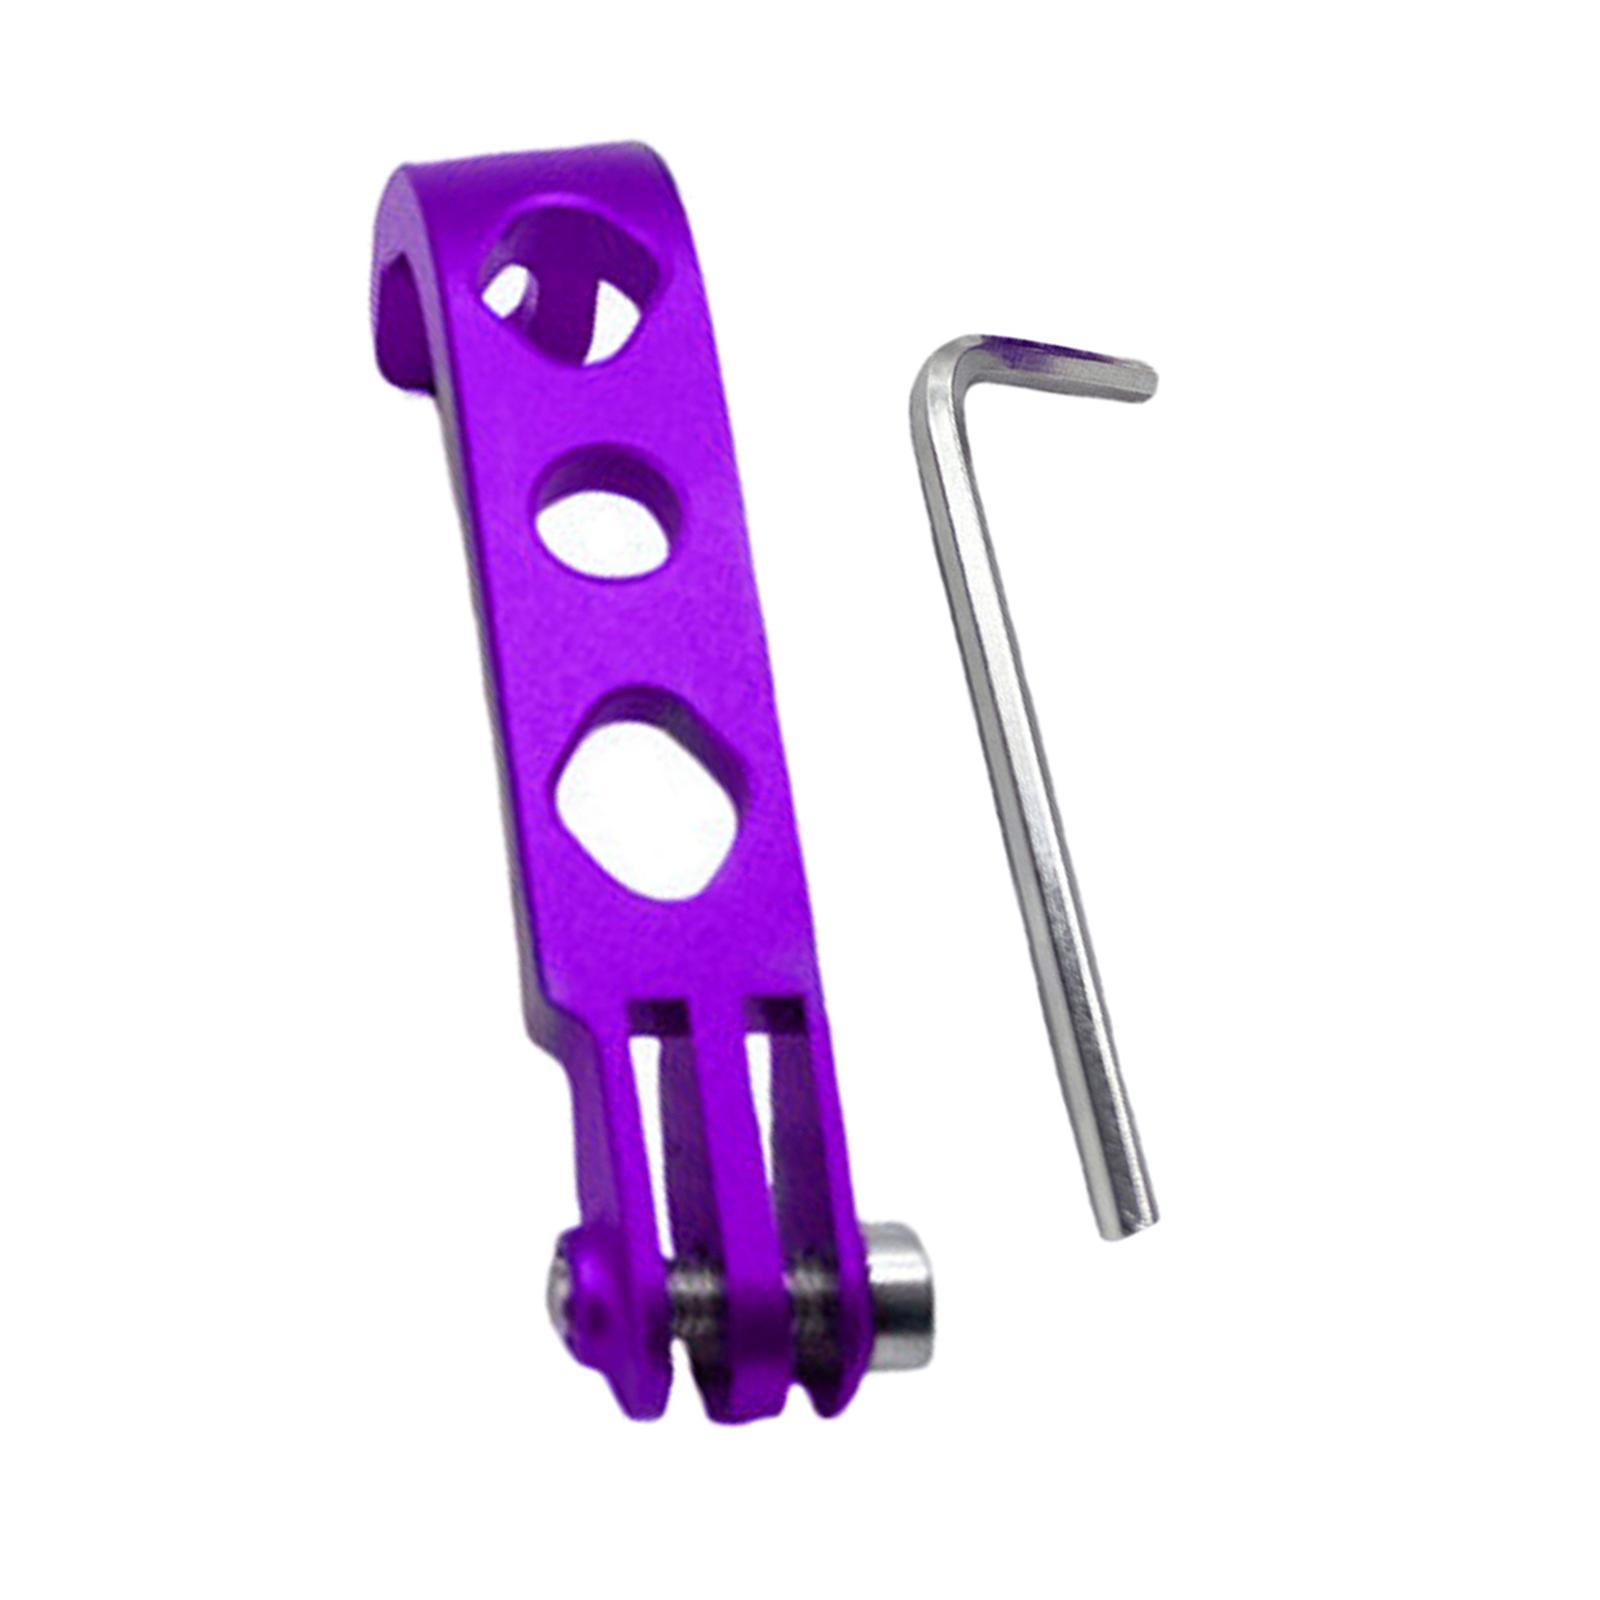 Flashlight Mount Holder Extension Parts for Sports Folding Bicycle Purple